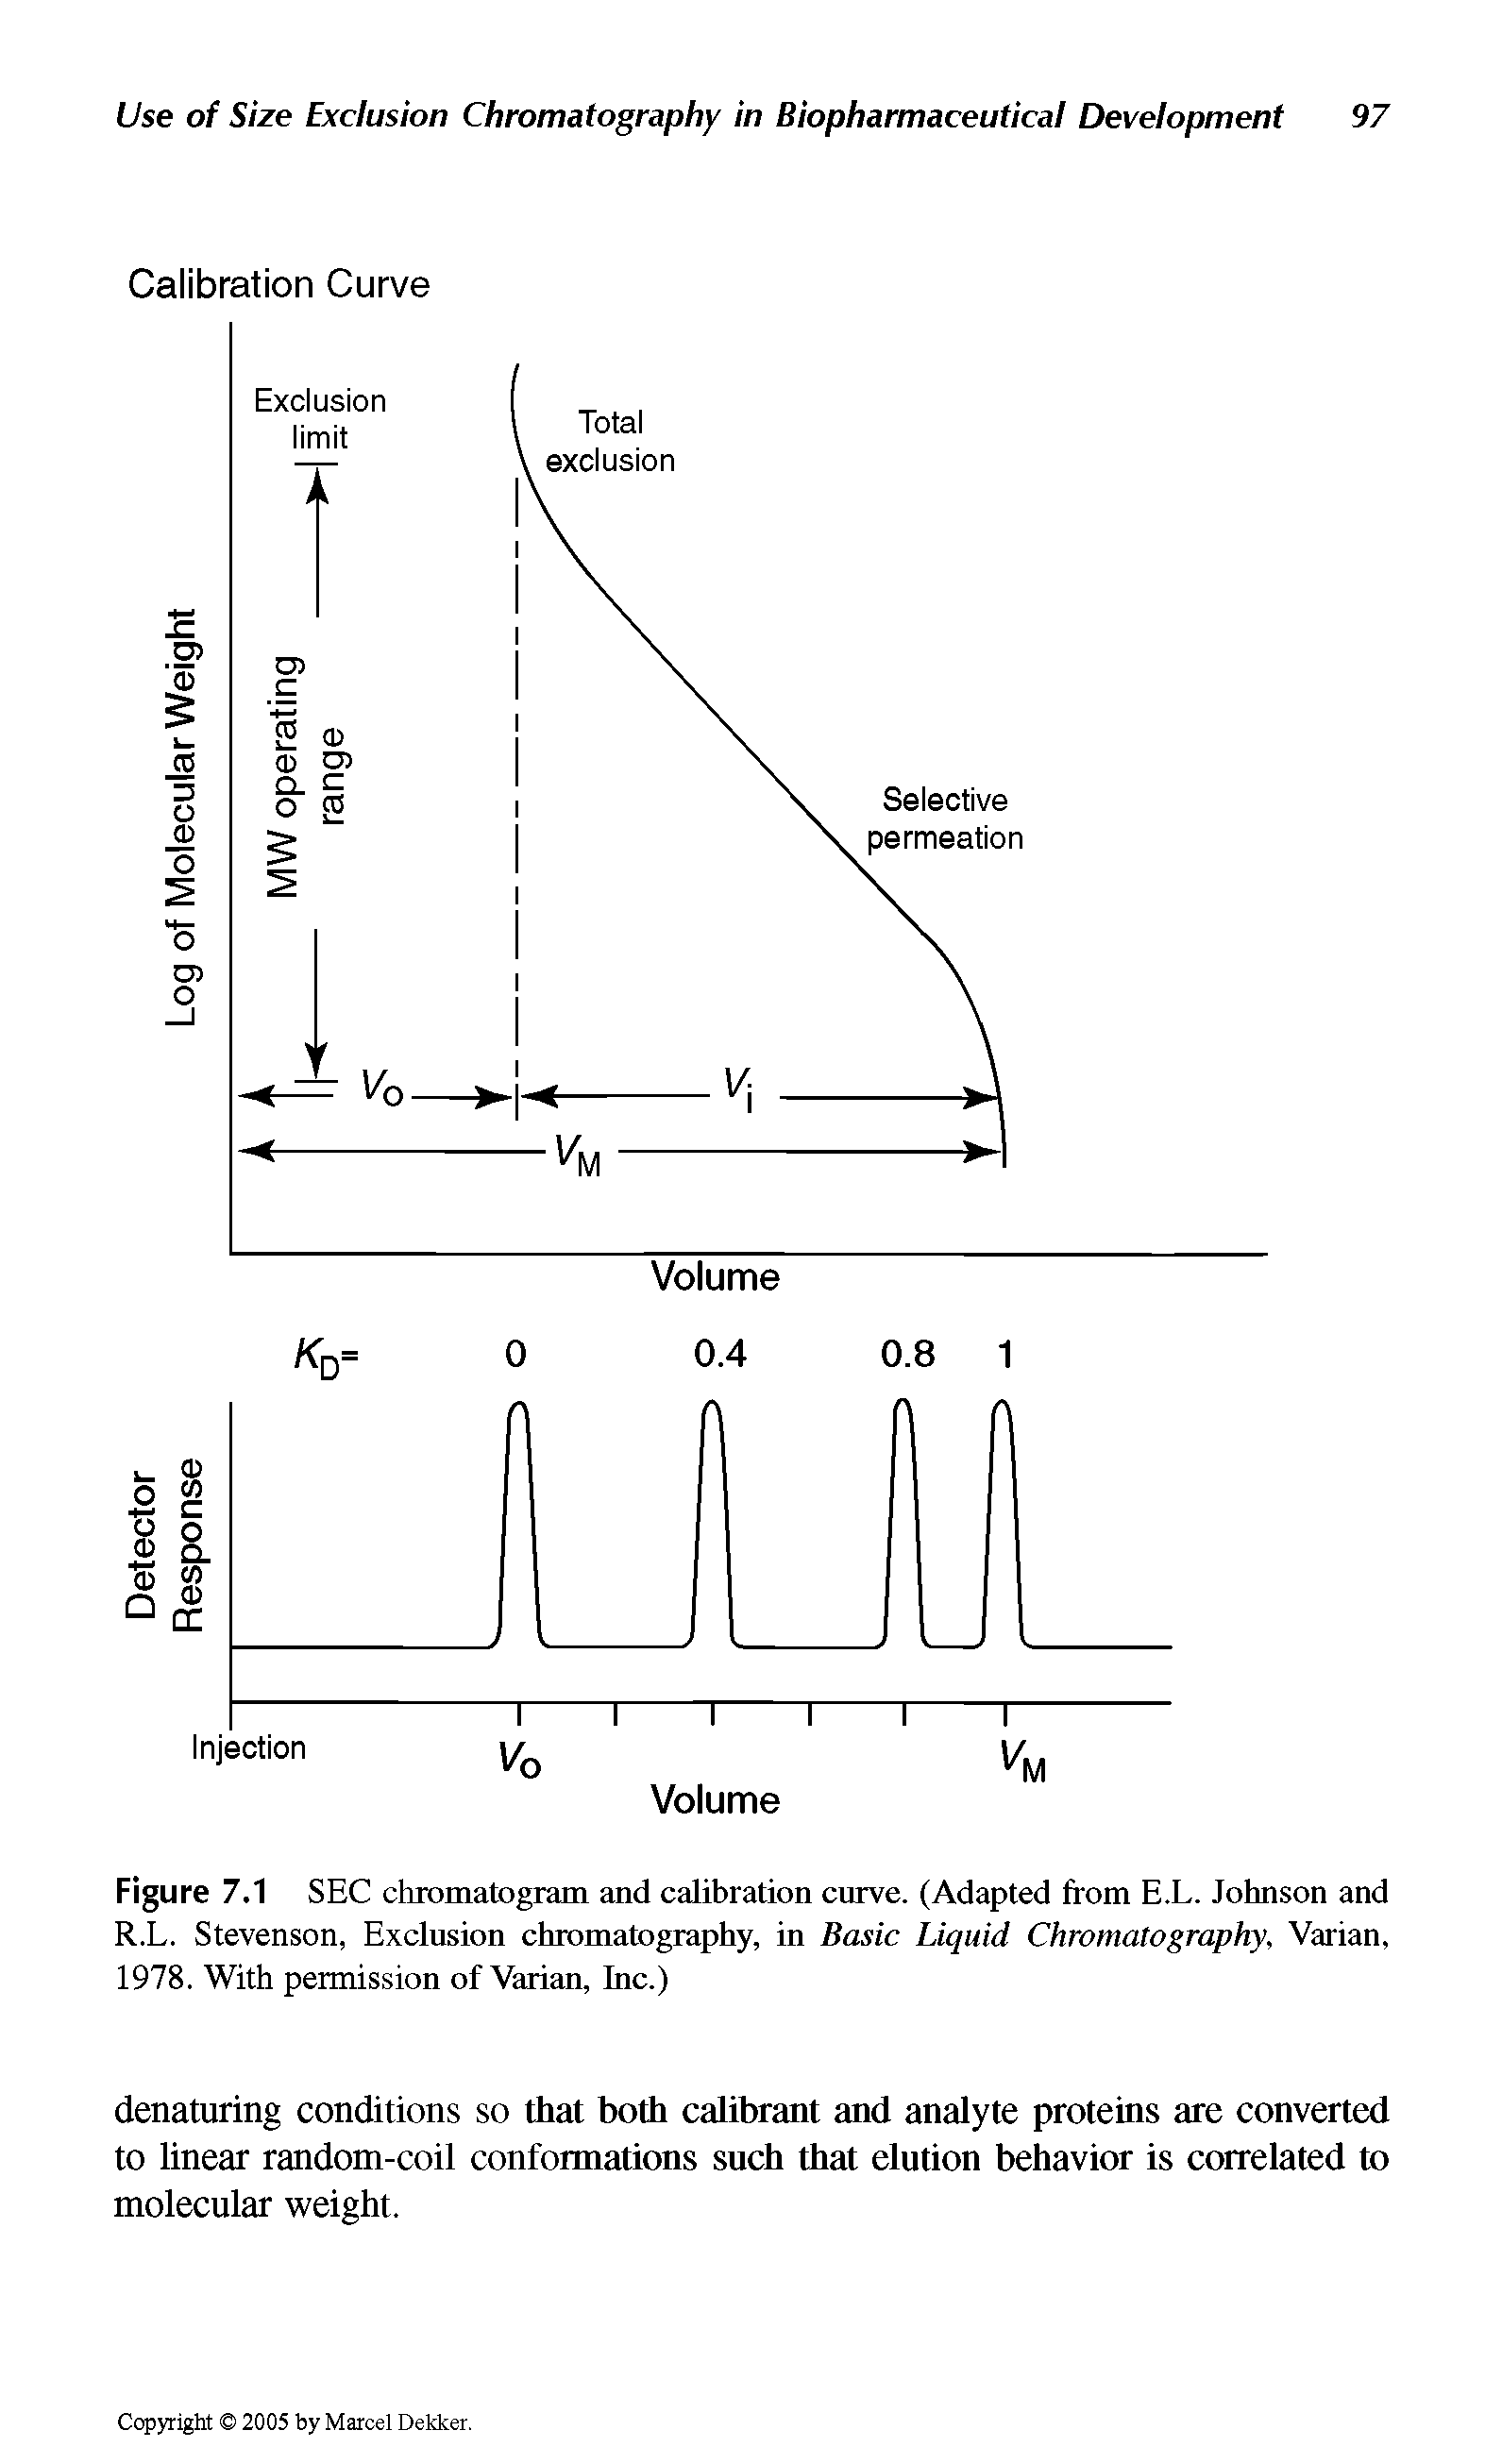 Figure 7.1 SEC chromatogram and calibration curve. (Adapted from E.L. Johnson and R.L. Stevenson, Exclusion chromatography, in Basic Liquid Chromatography, Varian, 1978. With permission of Varian, Inc.)...